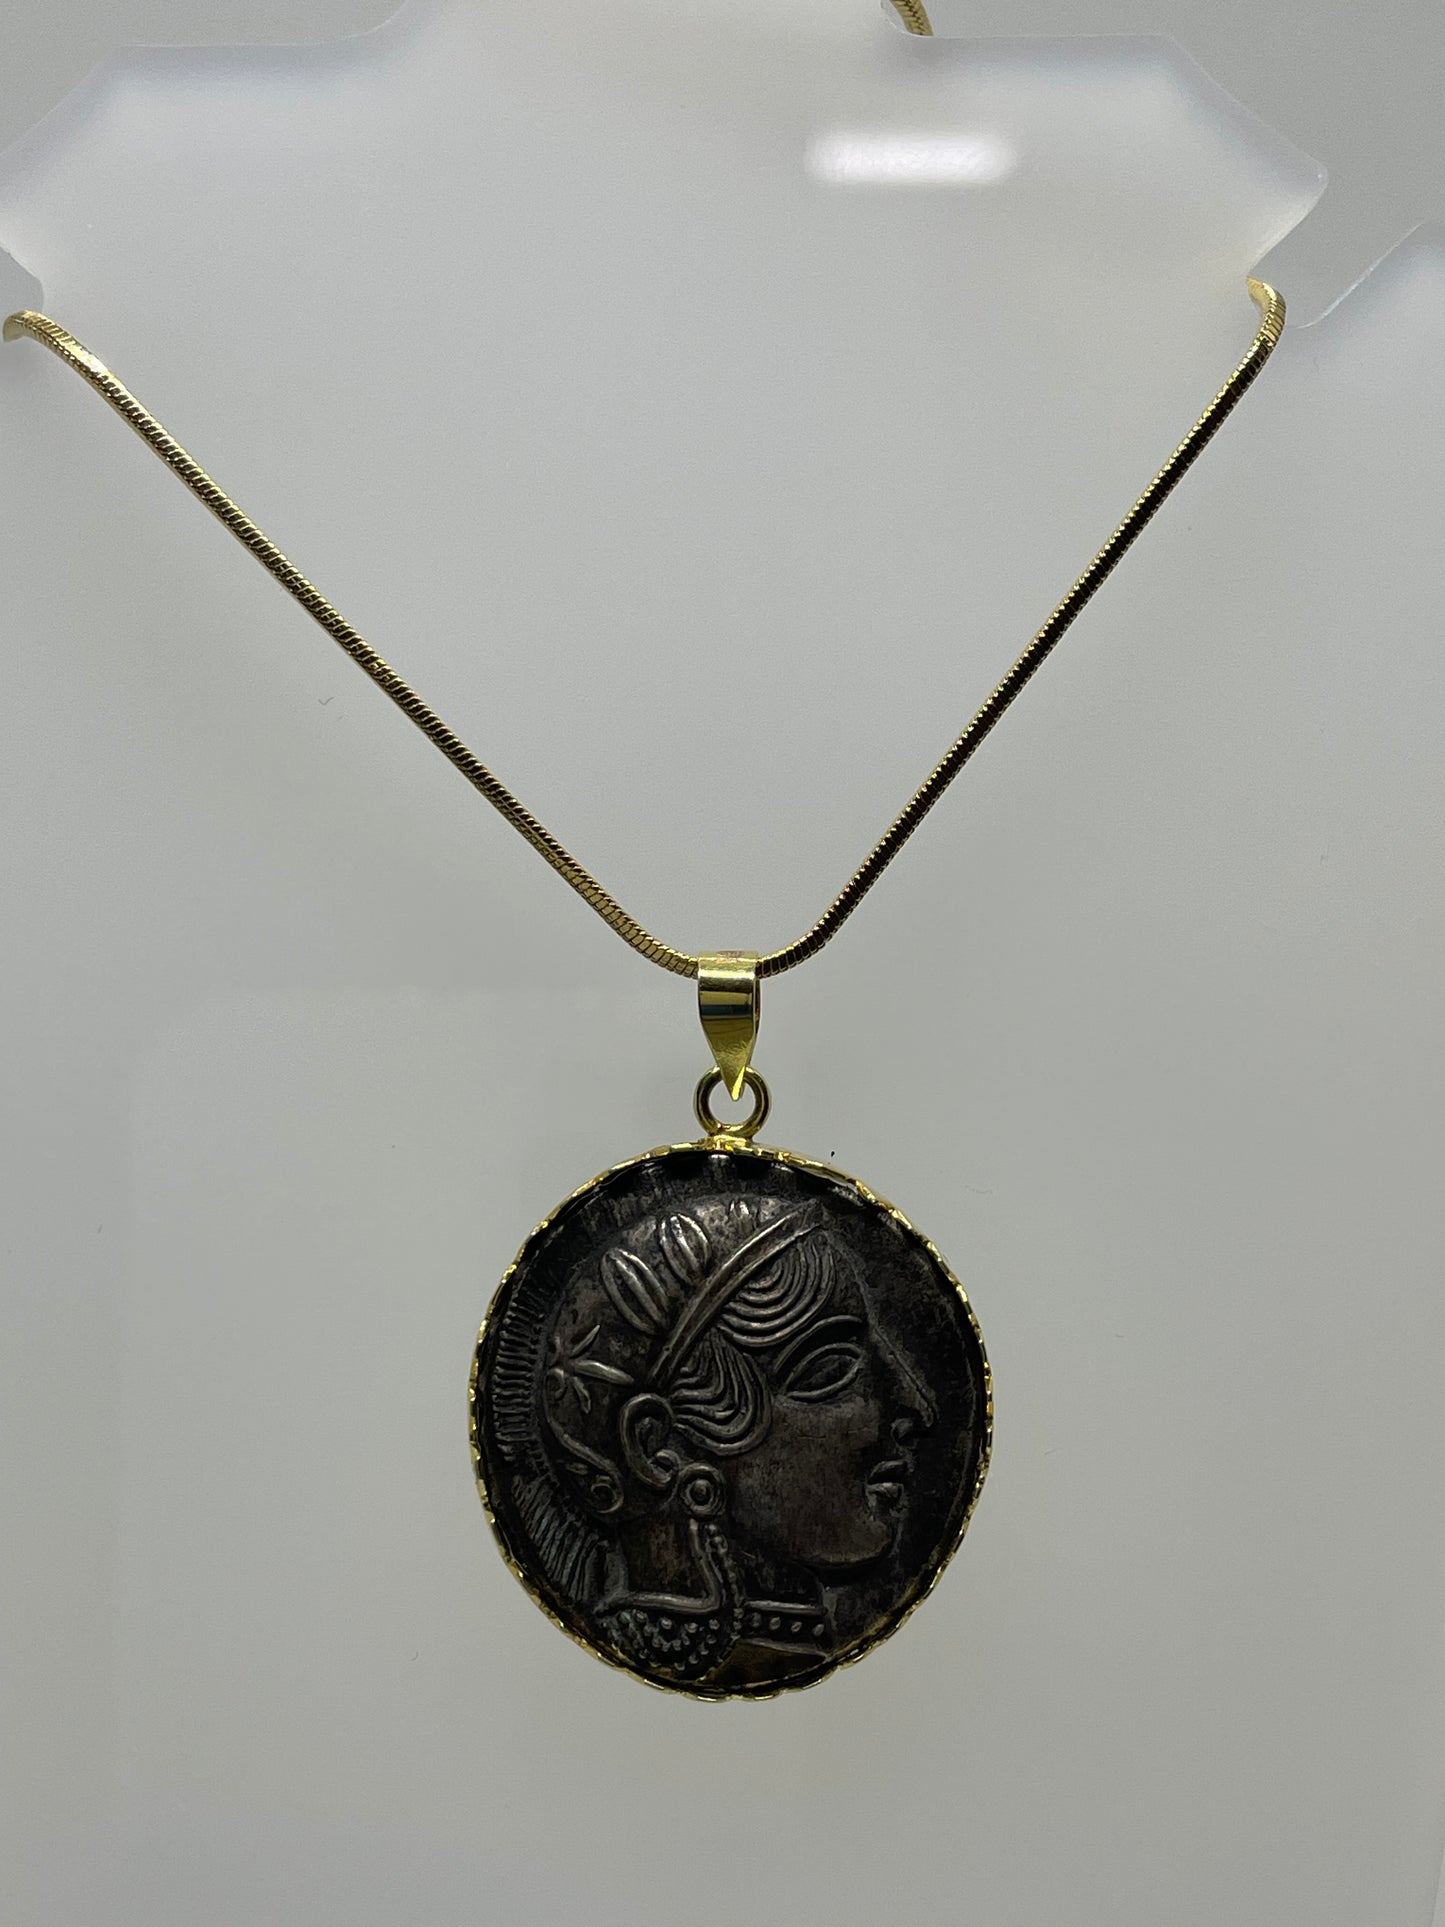 Goddess Athena Coin (405 BCE) in 14k Gold Pendant - Grace and Wisdom Preserved